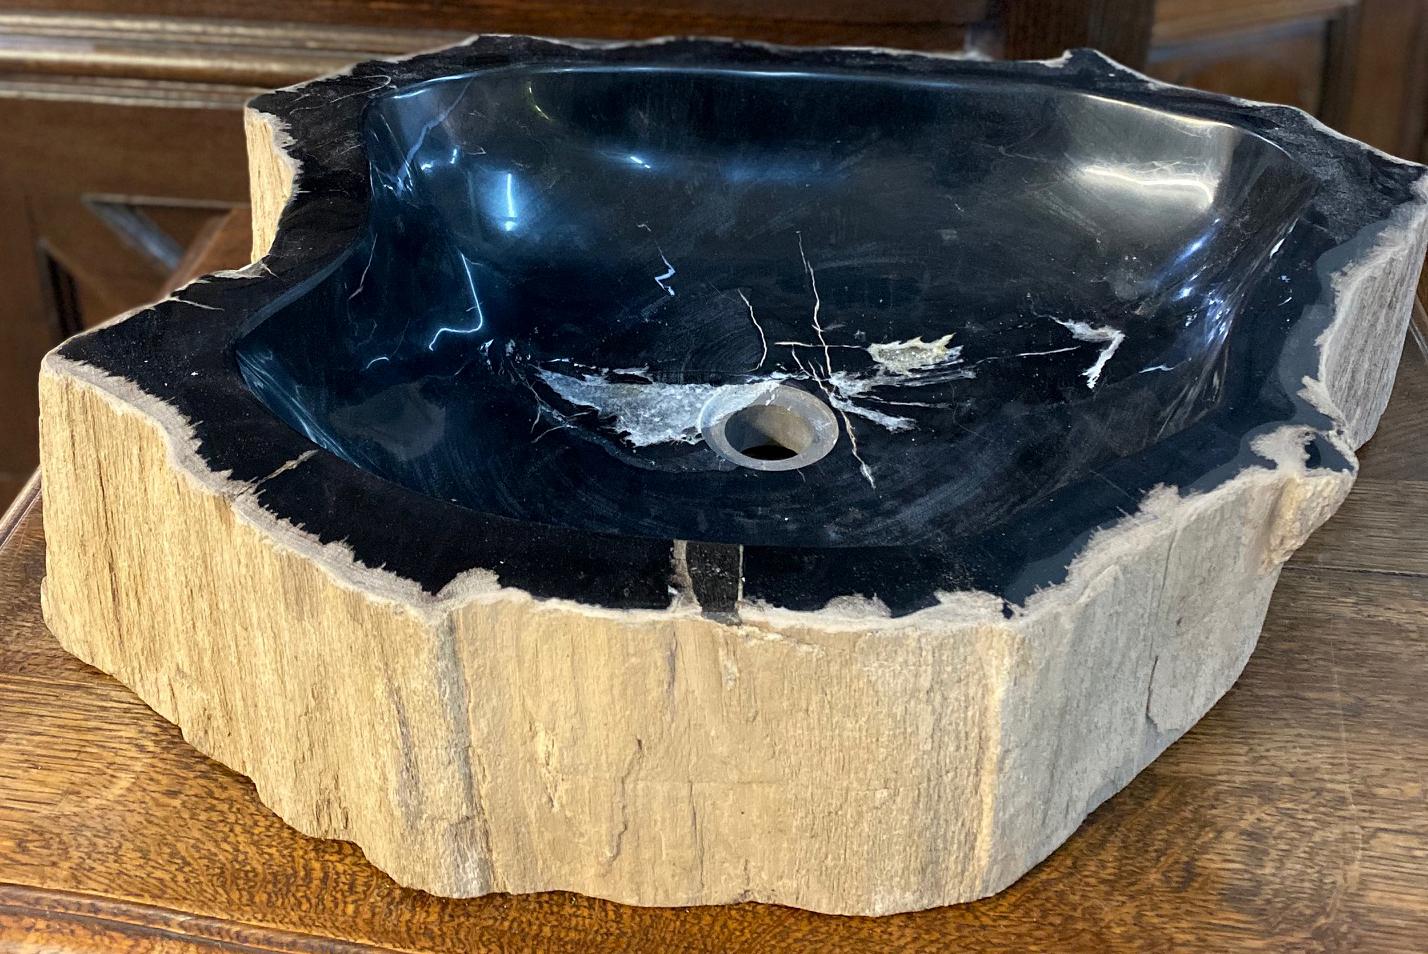 A single petrified wood wash basin. Petrified wood is a fossil, and over time, the wood becomes sturdy and dense -- making it as heavy as marble. The basin is mostly black, with various warm brown tones being the primary color palette around the